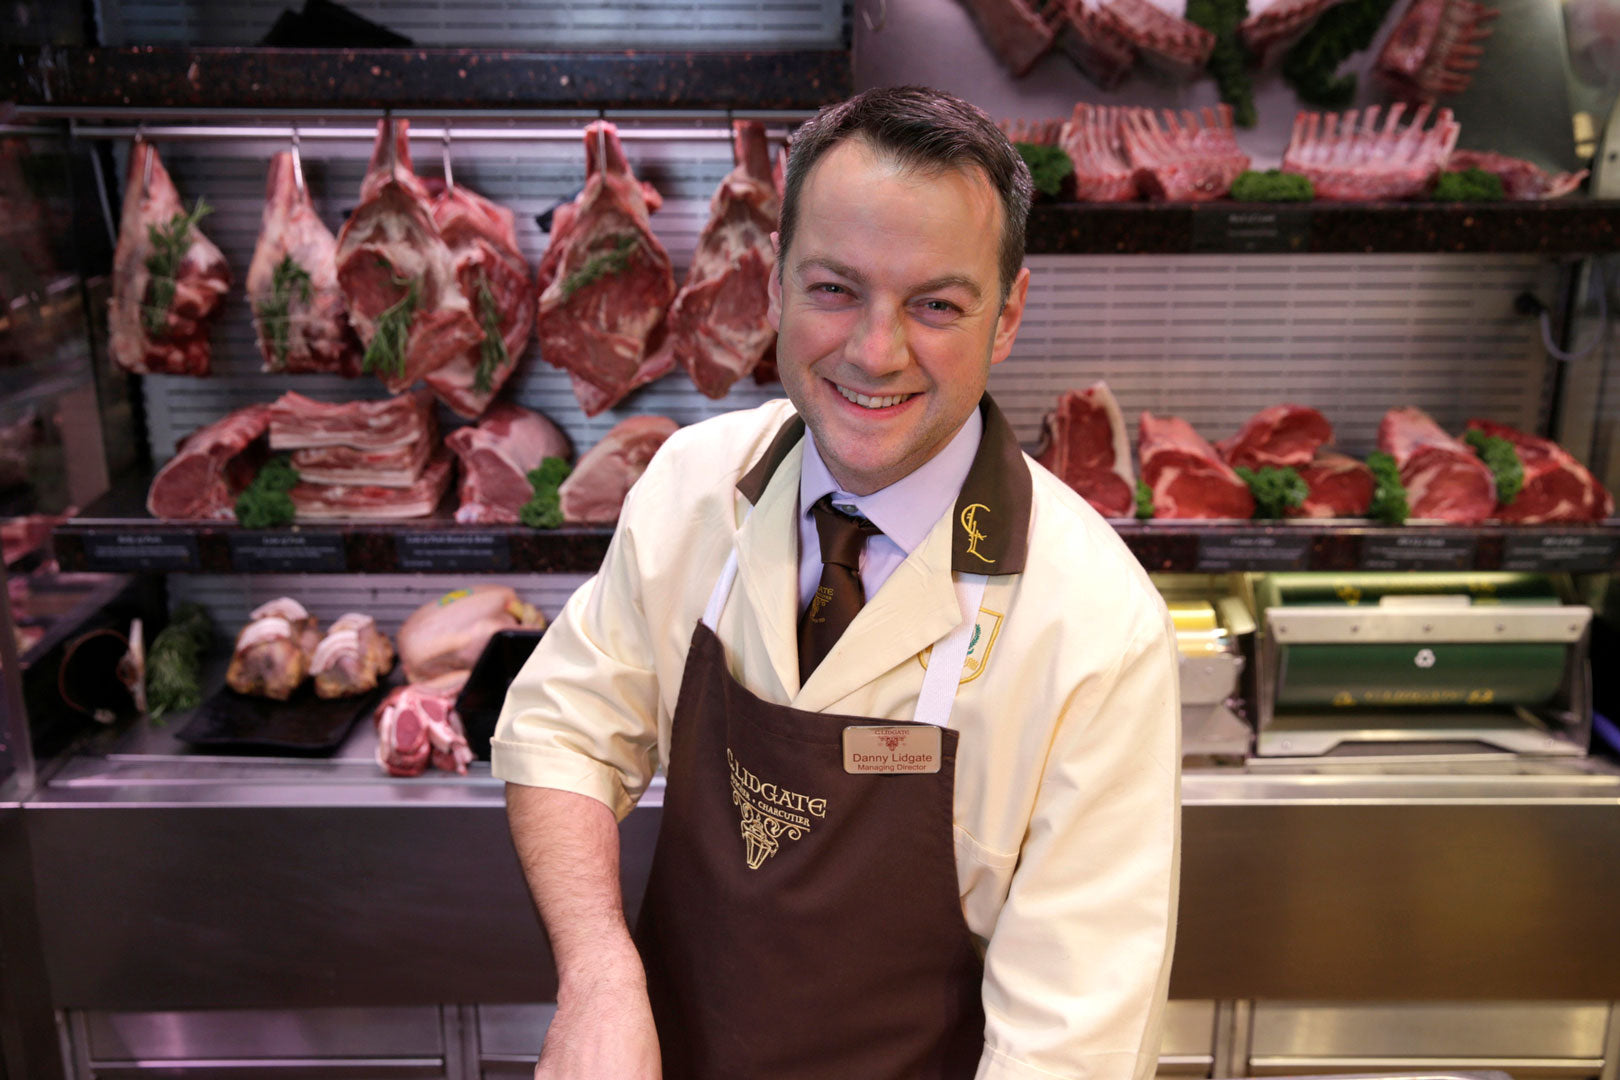 Danny's Days - A Week in the Life of A Butcher's Shop